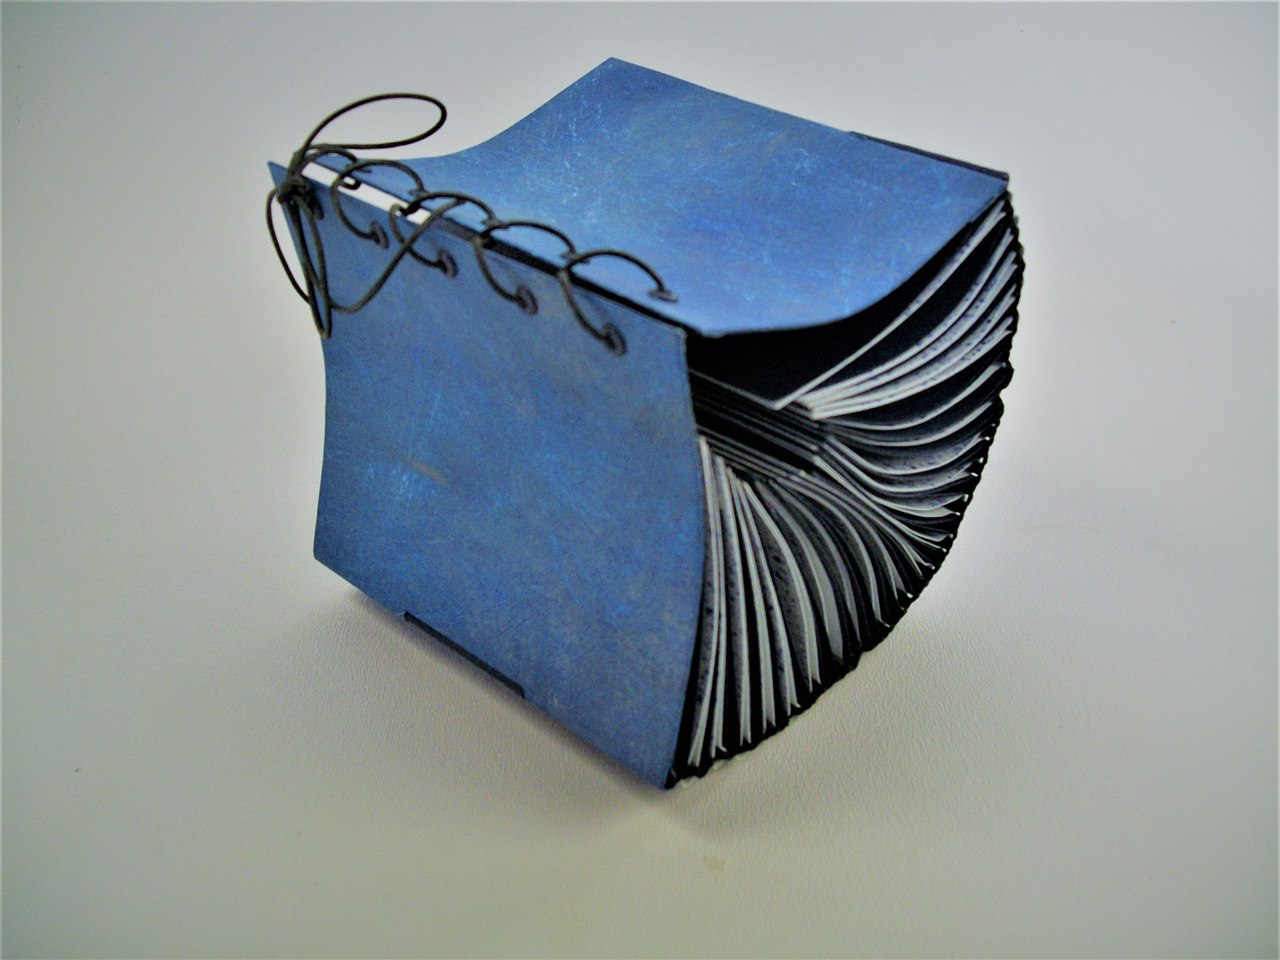 hinged book - from workshop (1)